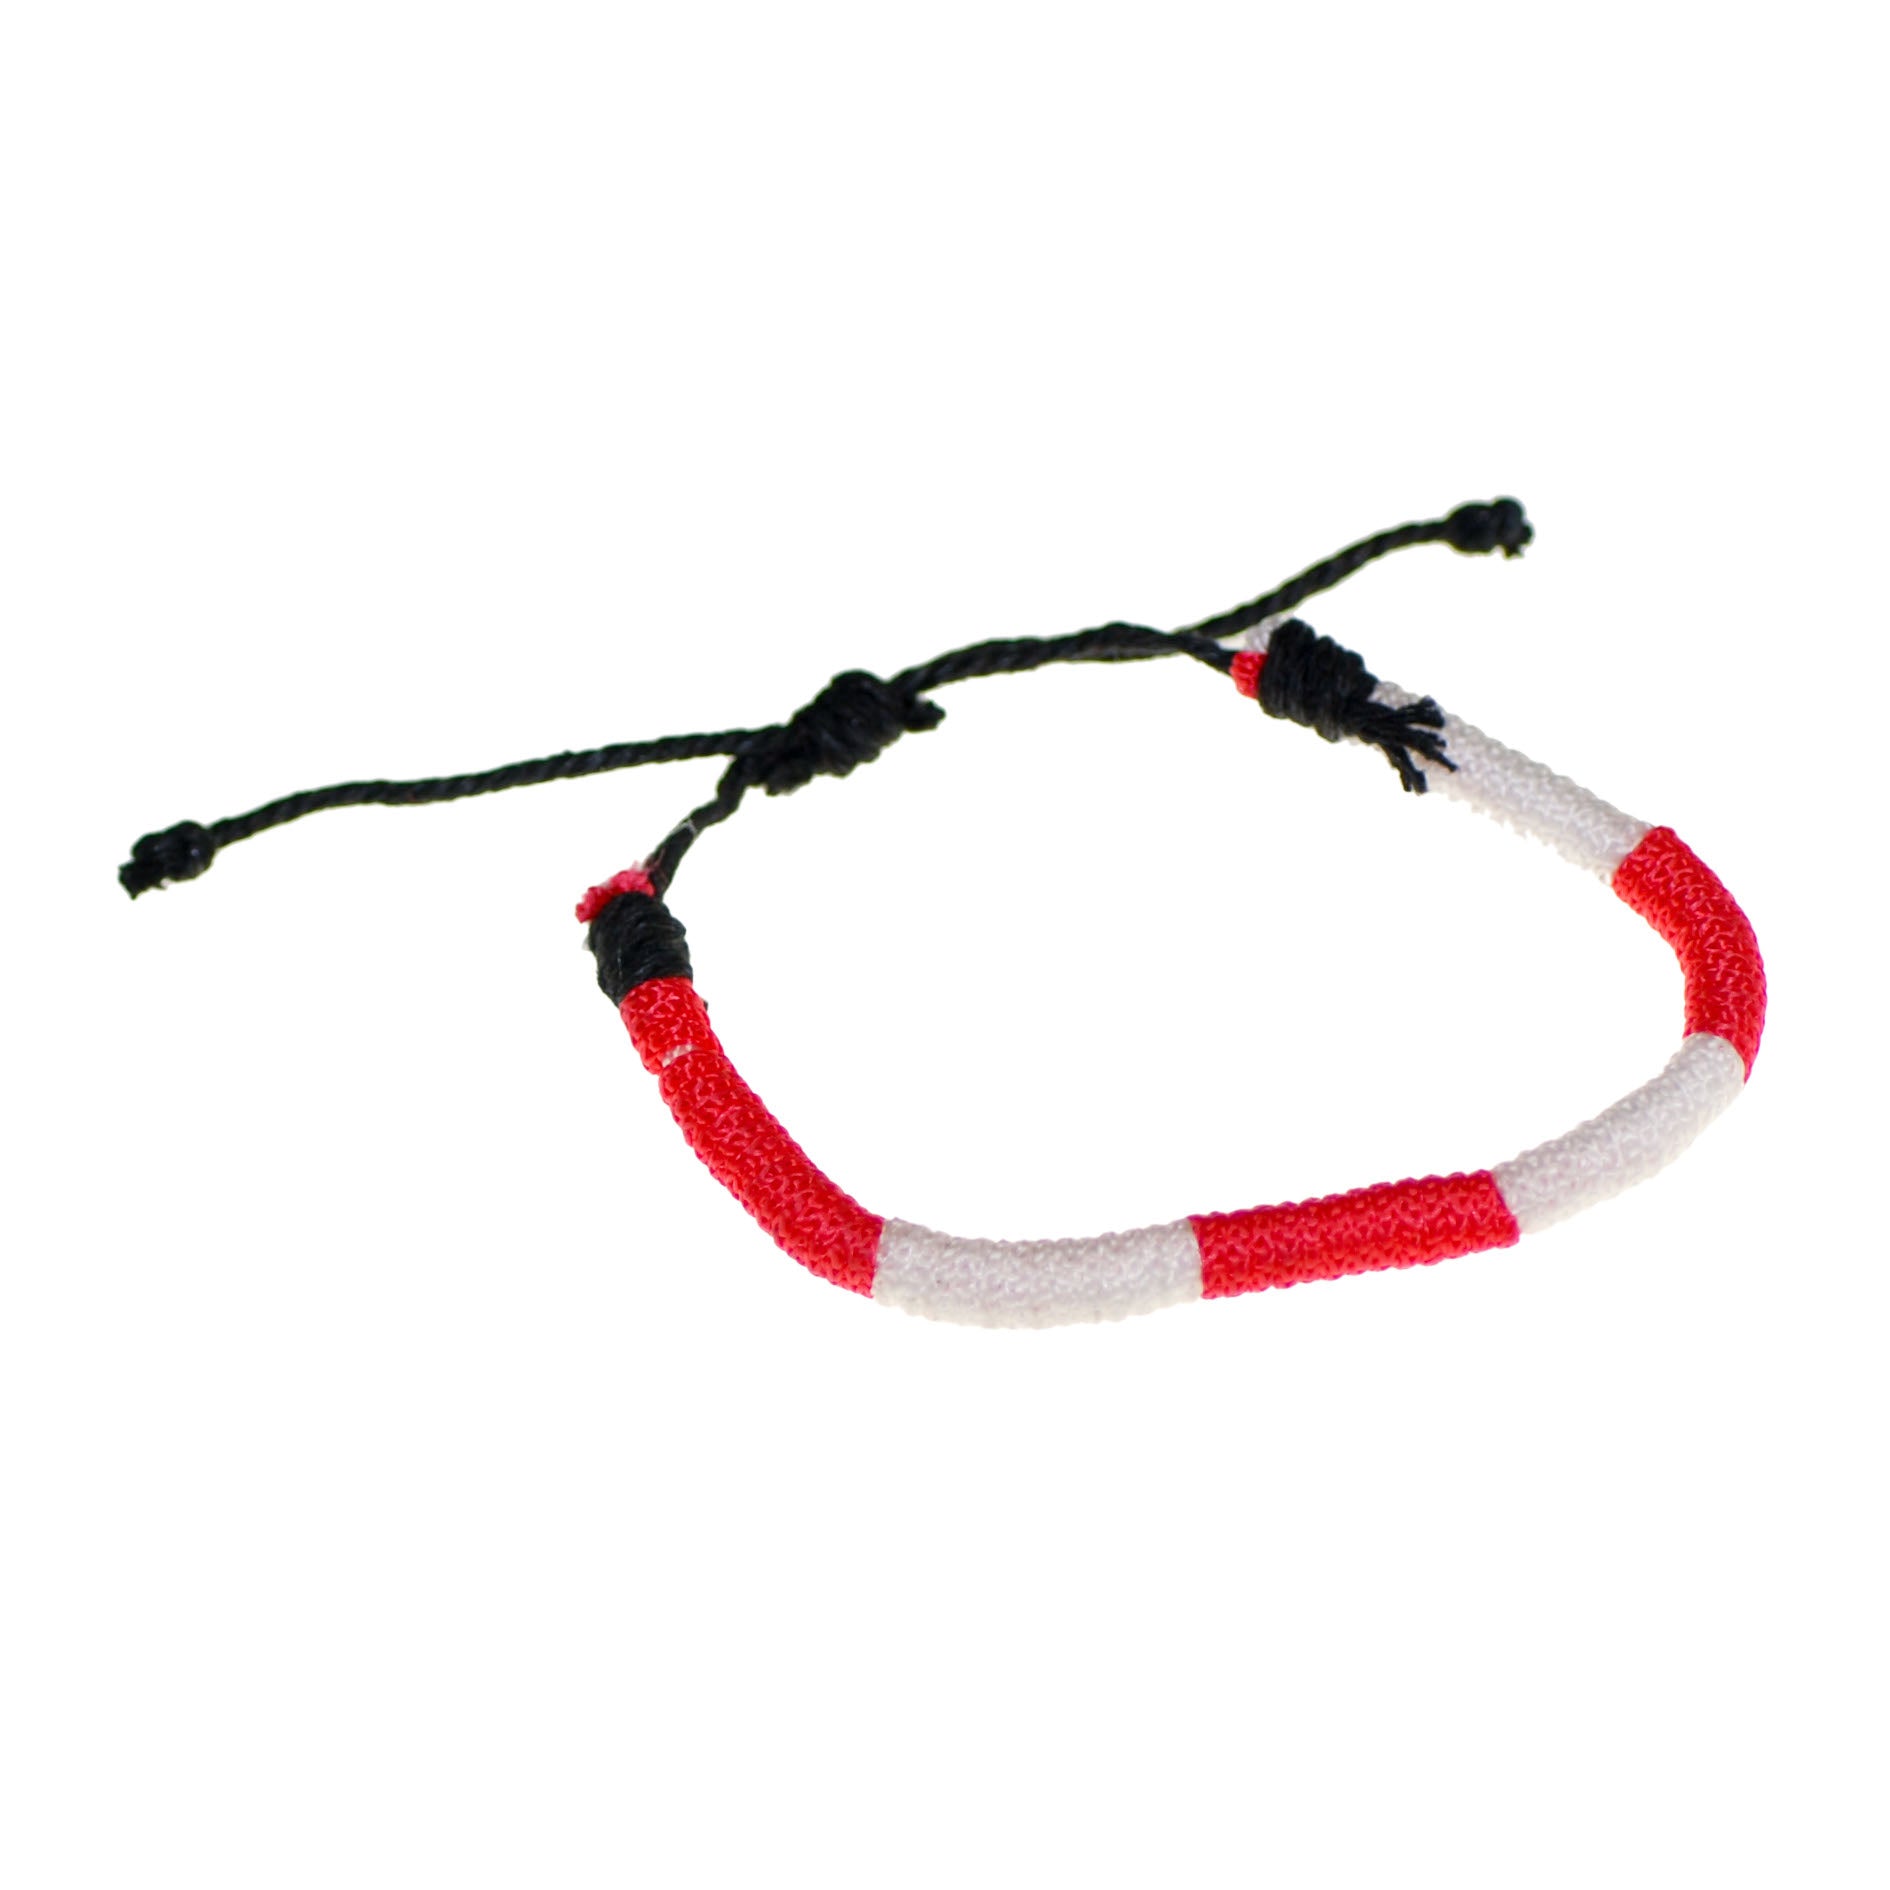 Wristband Tie - Polish National Colors of White & Red